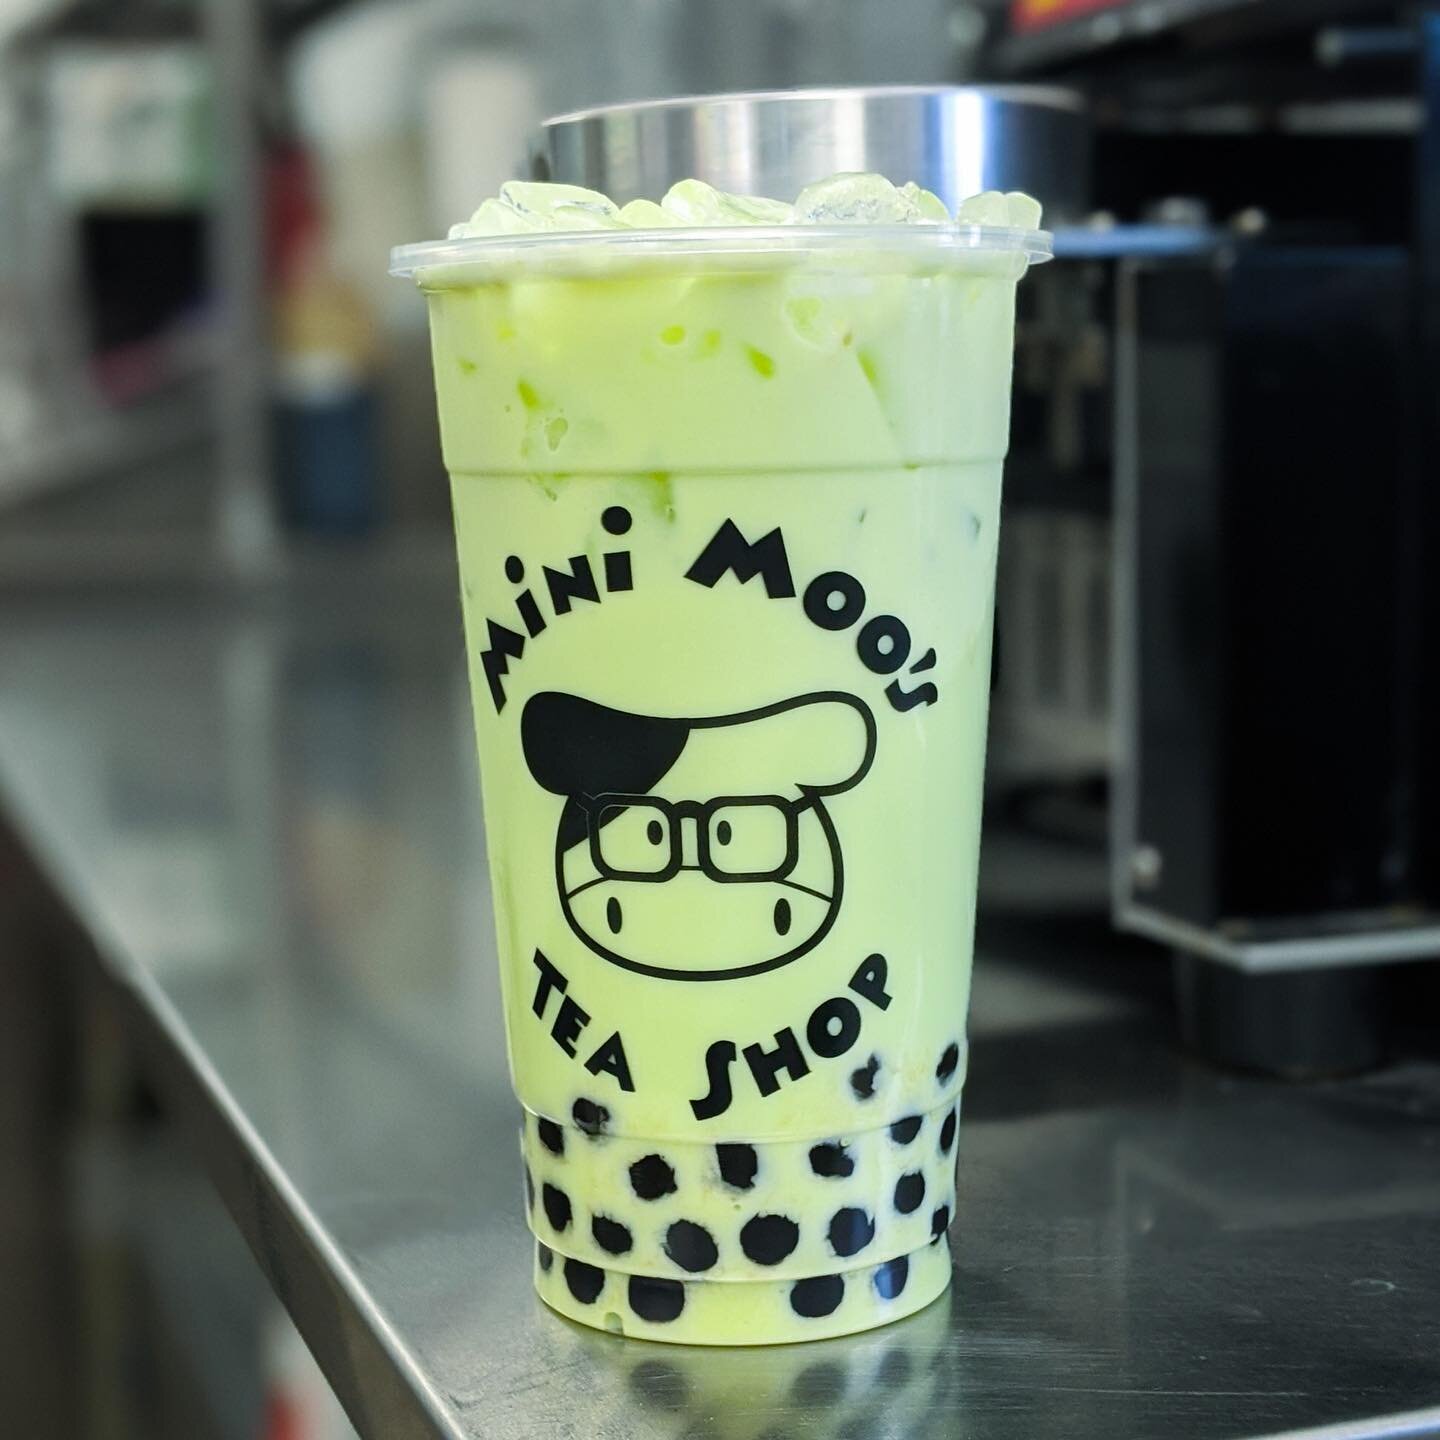 Happy Friday! 🎉 
PISTACHIO!!! Is here and now available in milk tea and snow bubbles. Stop by today and quench those cravings. 
#minimoosteashop #pistachio #thirsty #bobaday #milktea #denverboba #coloradoboba #moodbooster #stackyourboba #supportloca